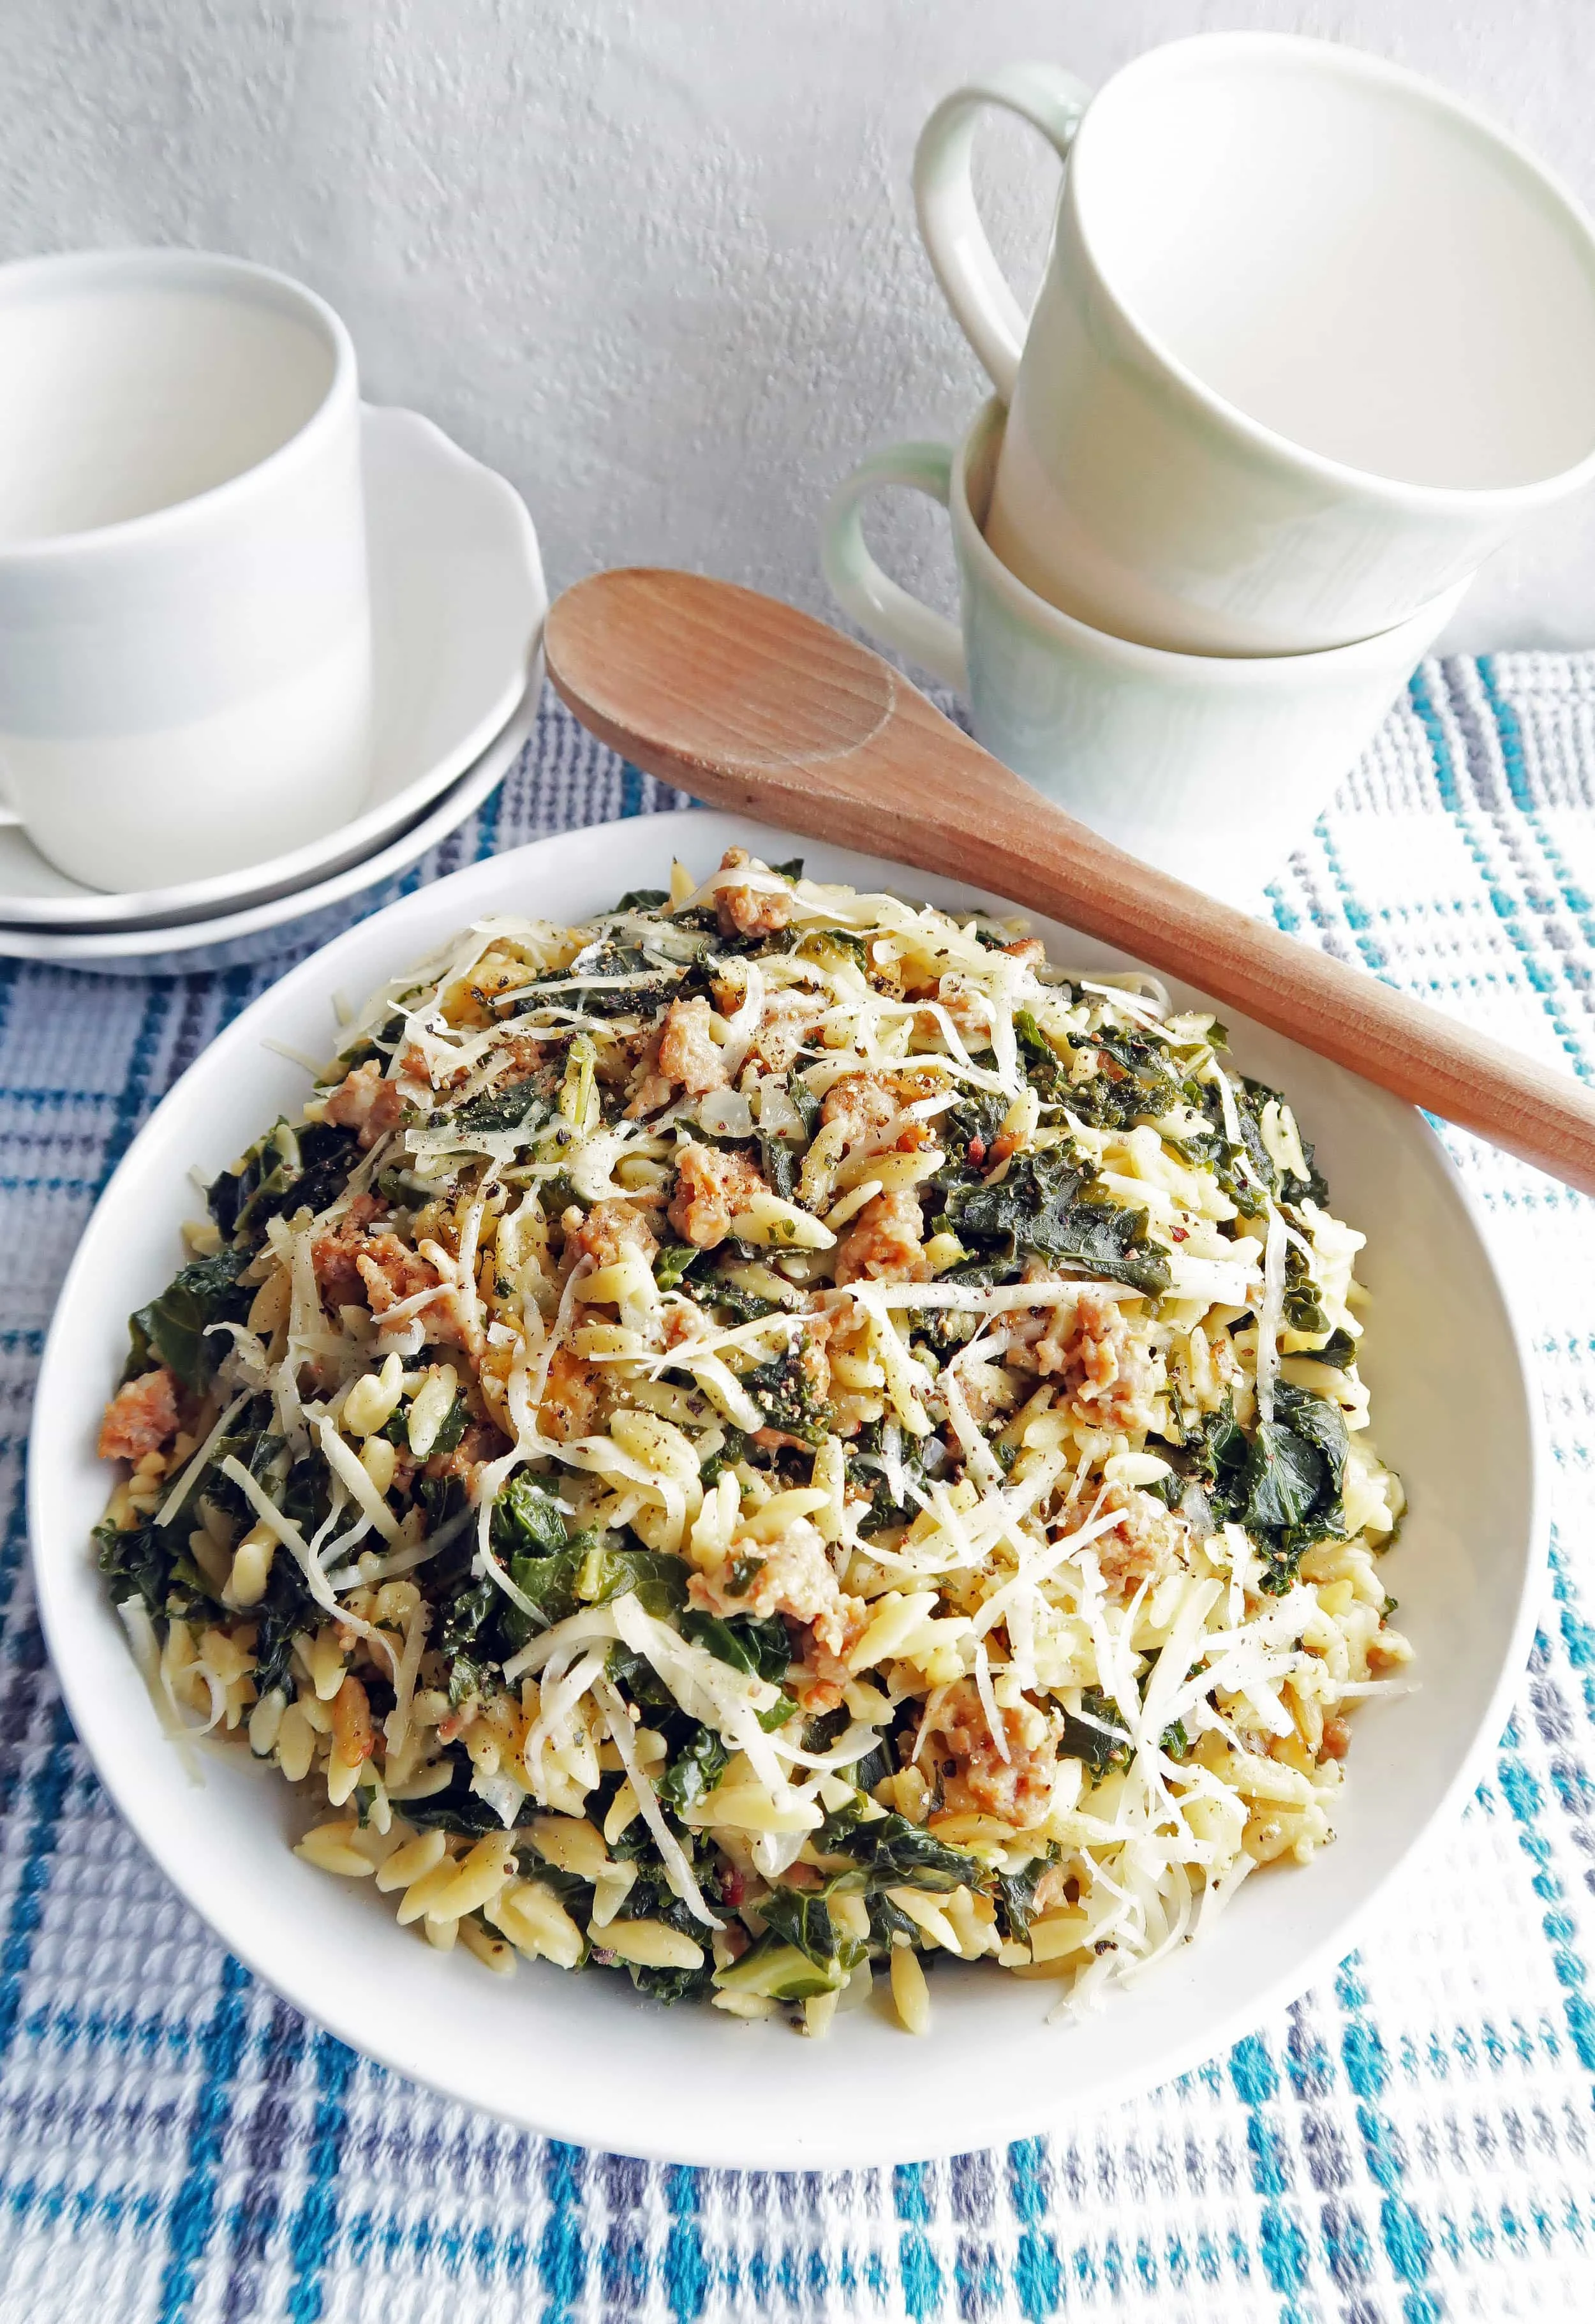 Orzo pasta with Italian sausage and kale with shredded cheese on top in a large pasta bowl.